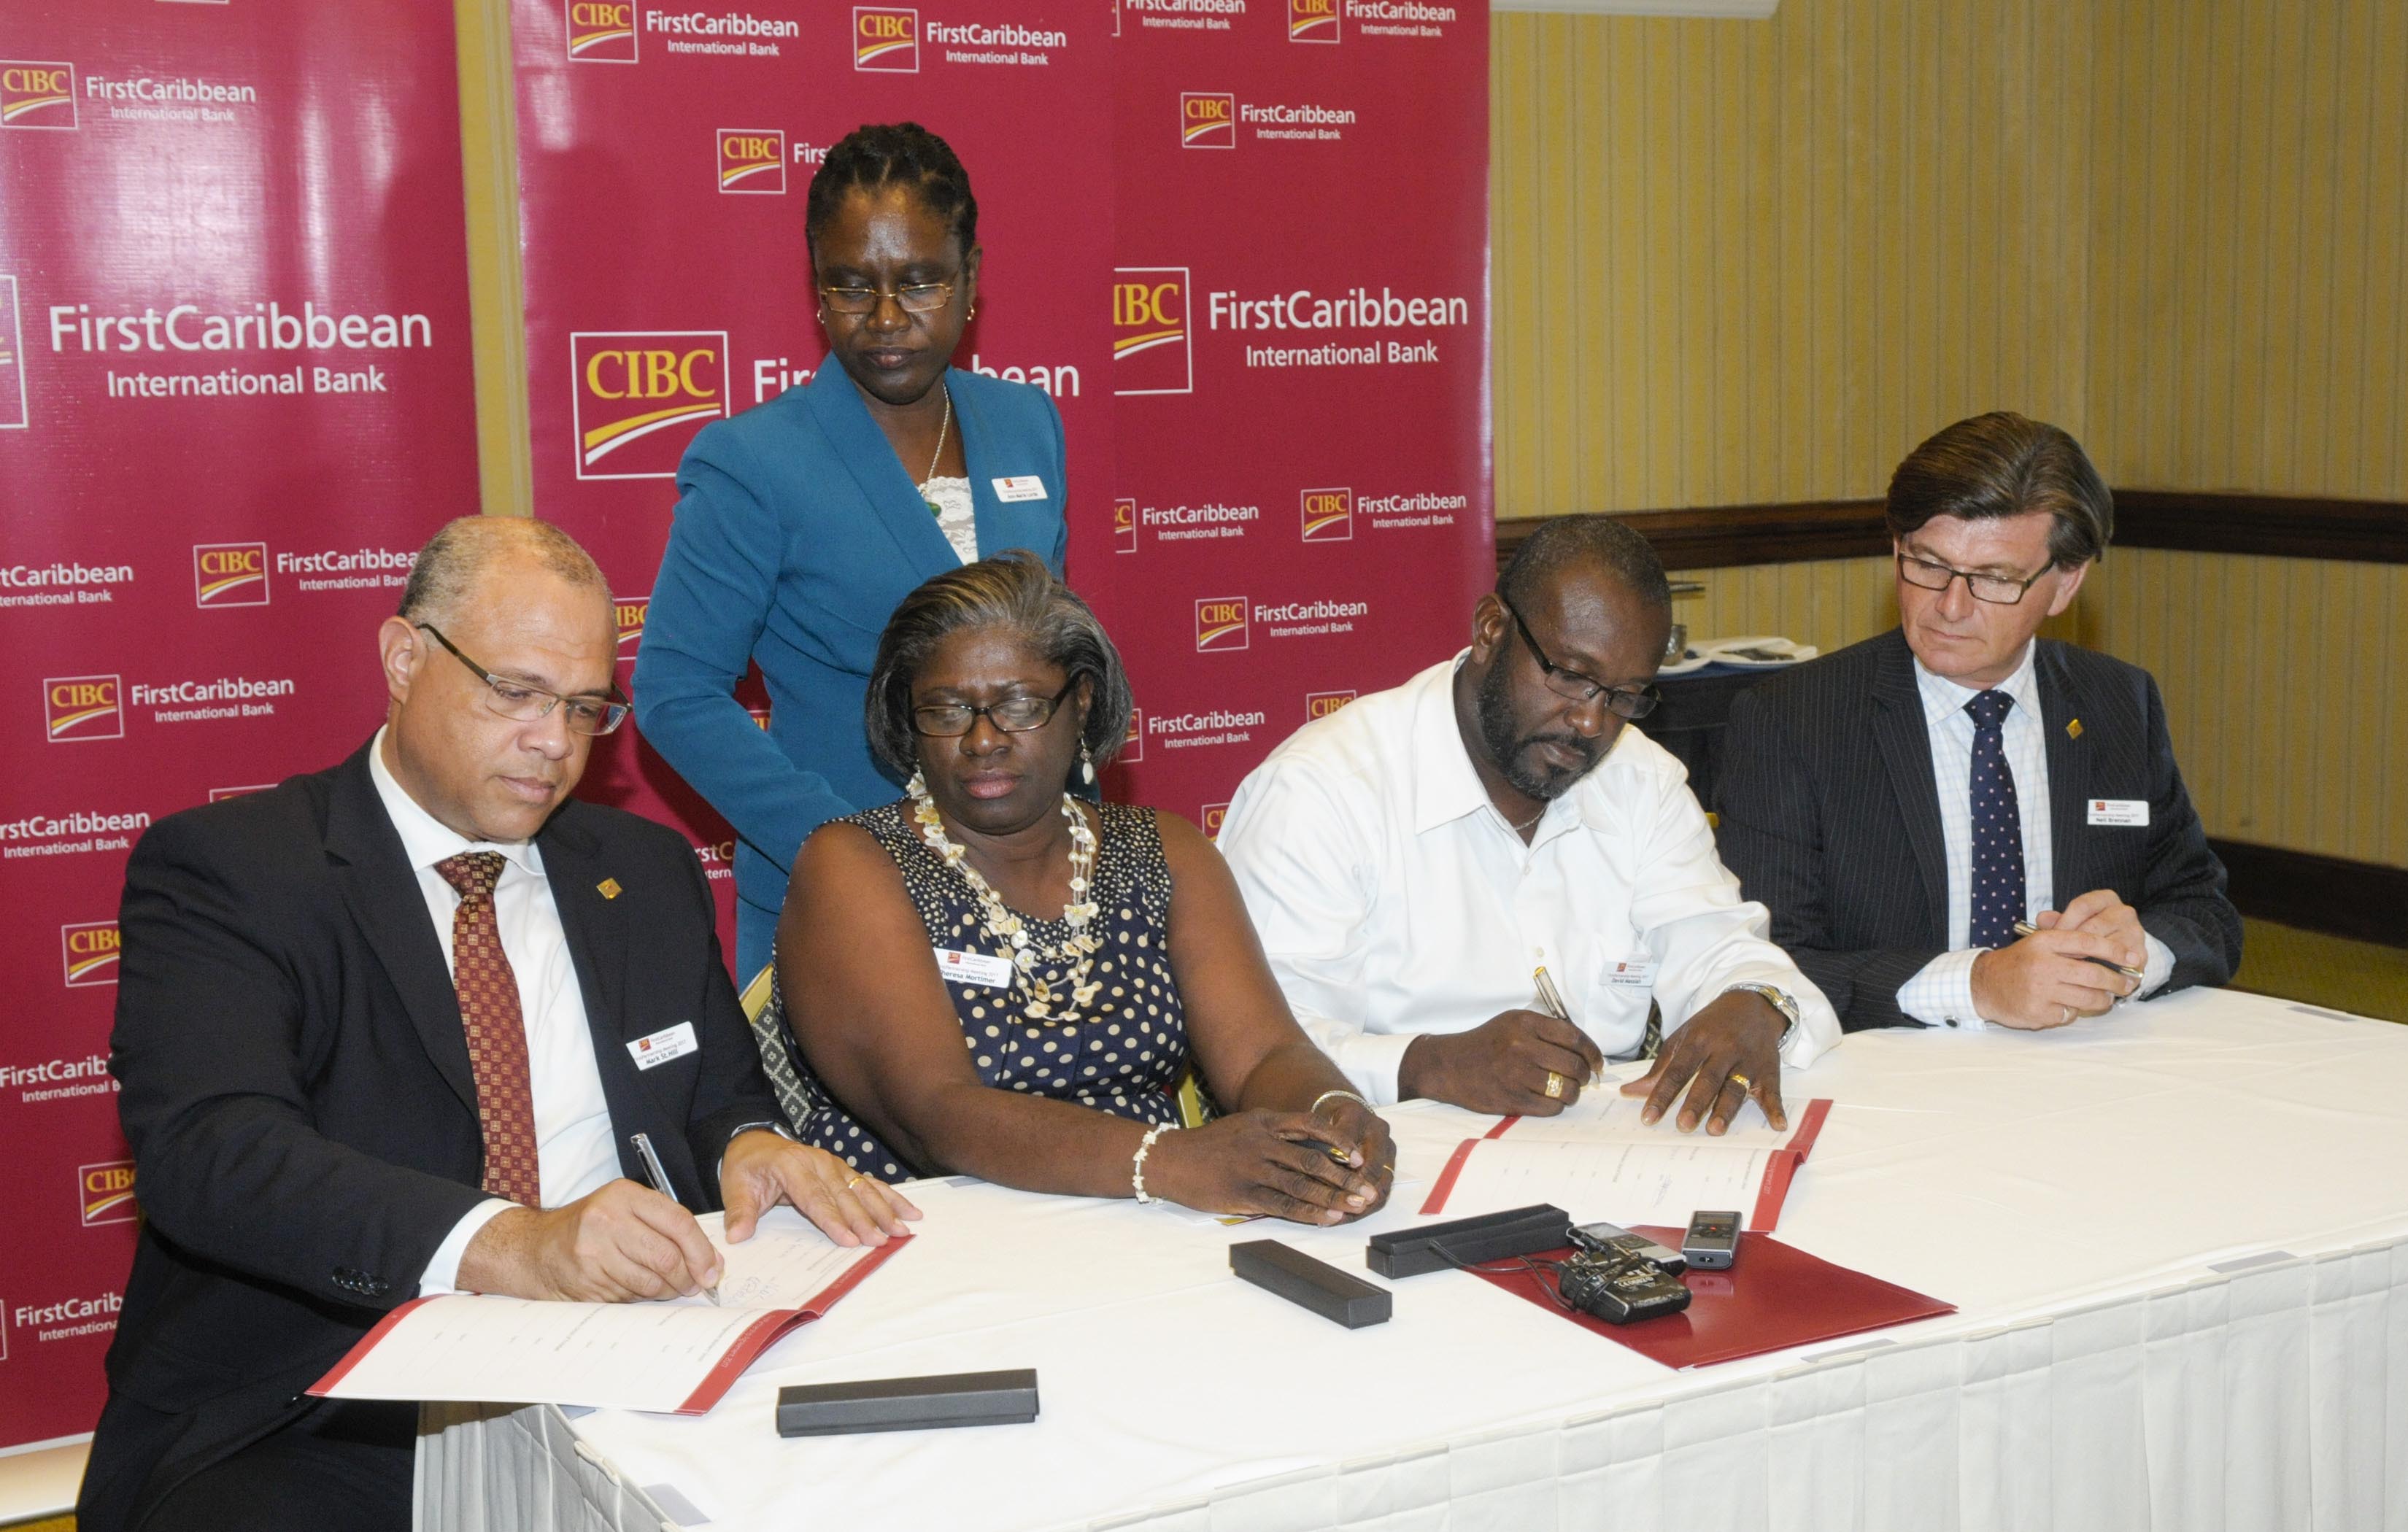 CIBC FIRSTCARIBBEAN AND 11 REGIONAL LABOUR UNIONS SIGN SECOND HISTORIC AGREEMENT